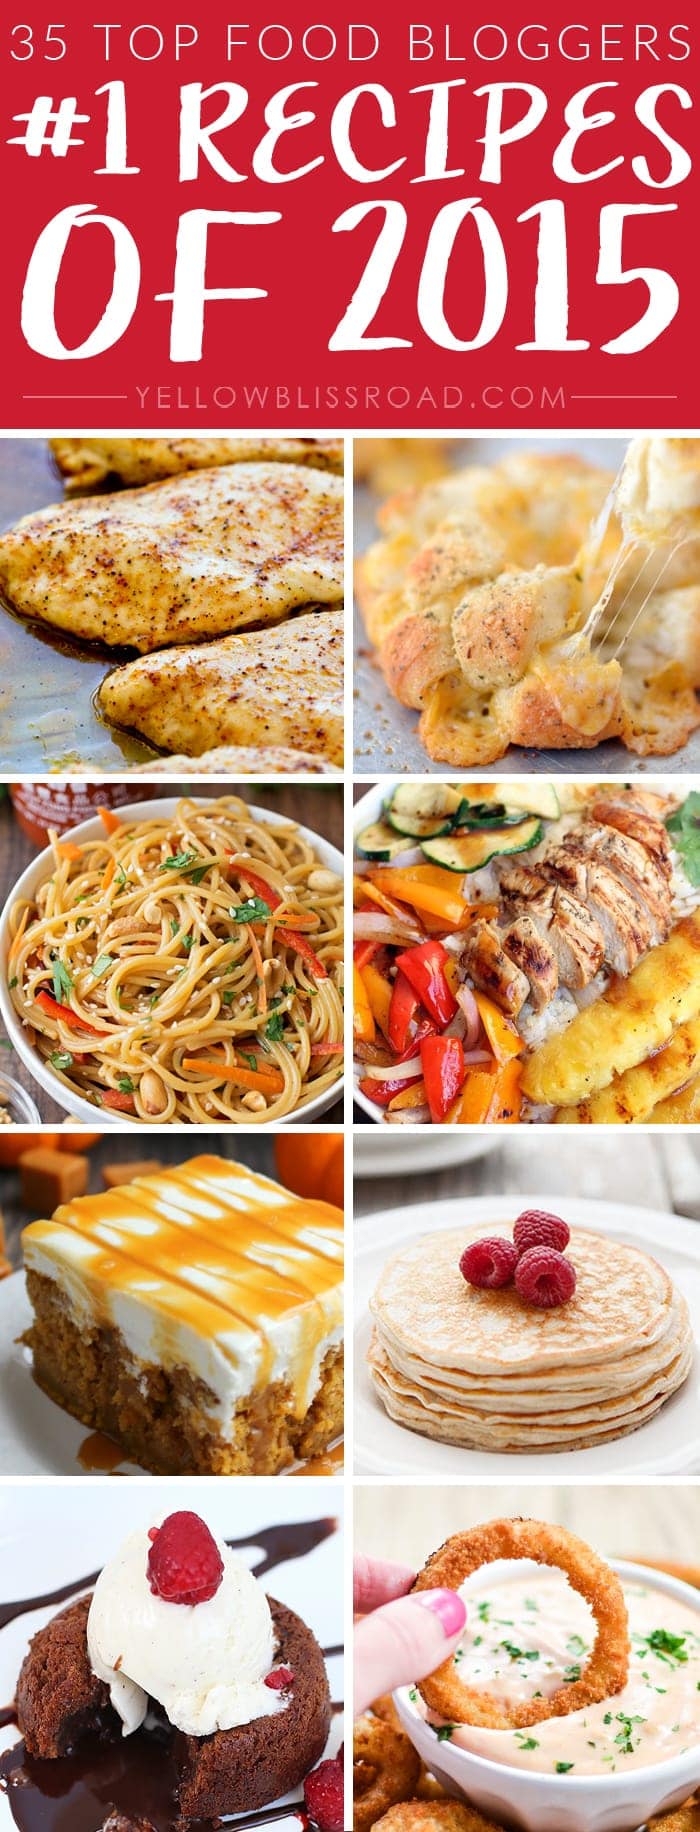 35 Top Food Bloggers #1 Recipes of 2015